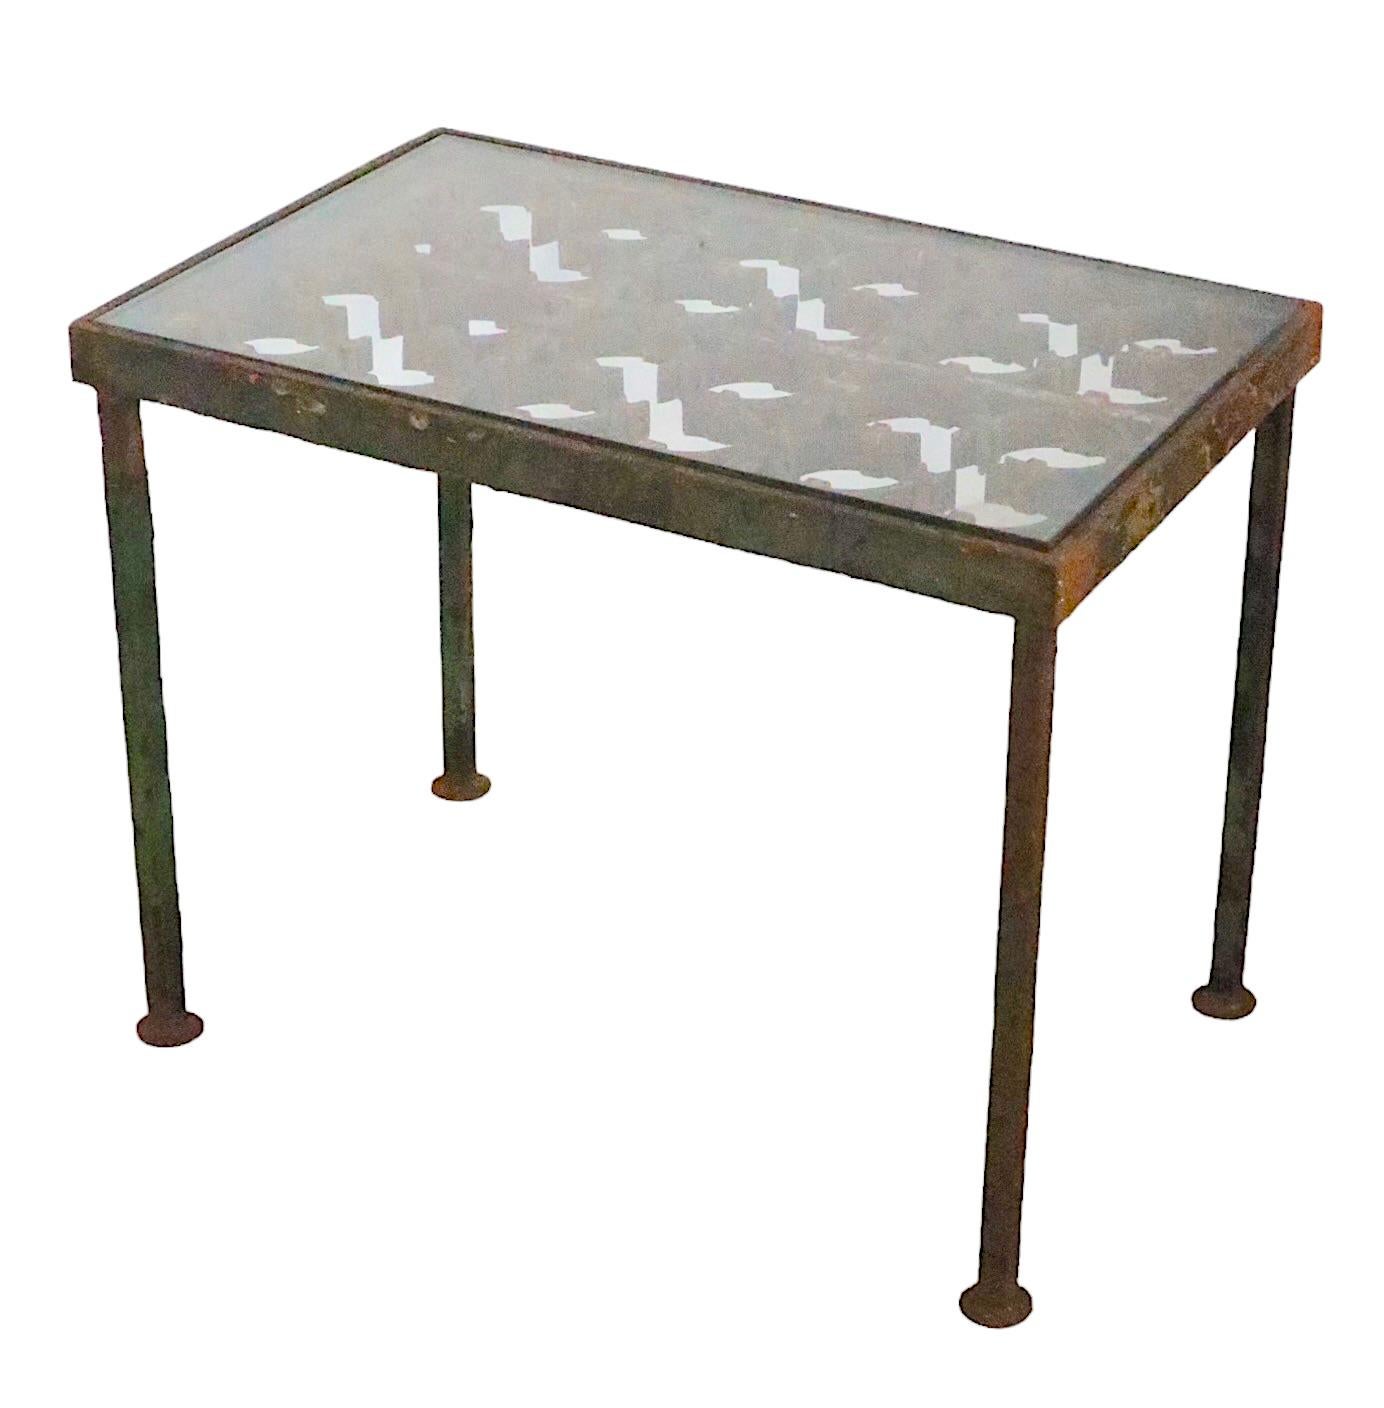 Garden, patio or poolside table constructed of a decorative cast iron panel, of classical latticework pattern, set in a steel frame, with a thick plate glass top. The cast iron panel was salvaged from a large scale building, and repurposed as a side